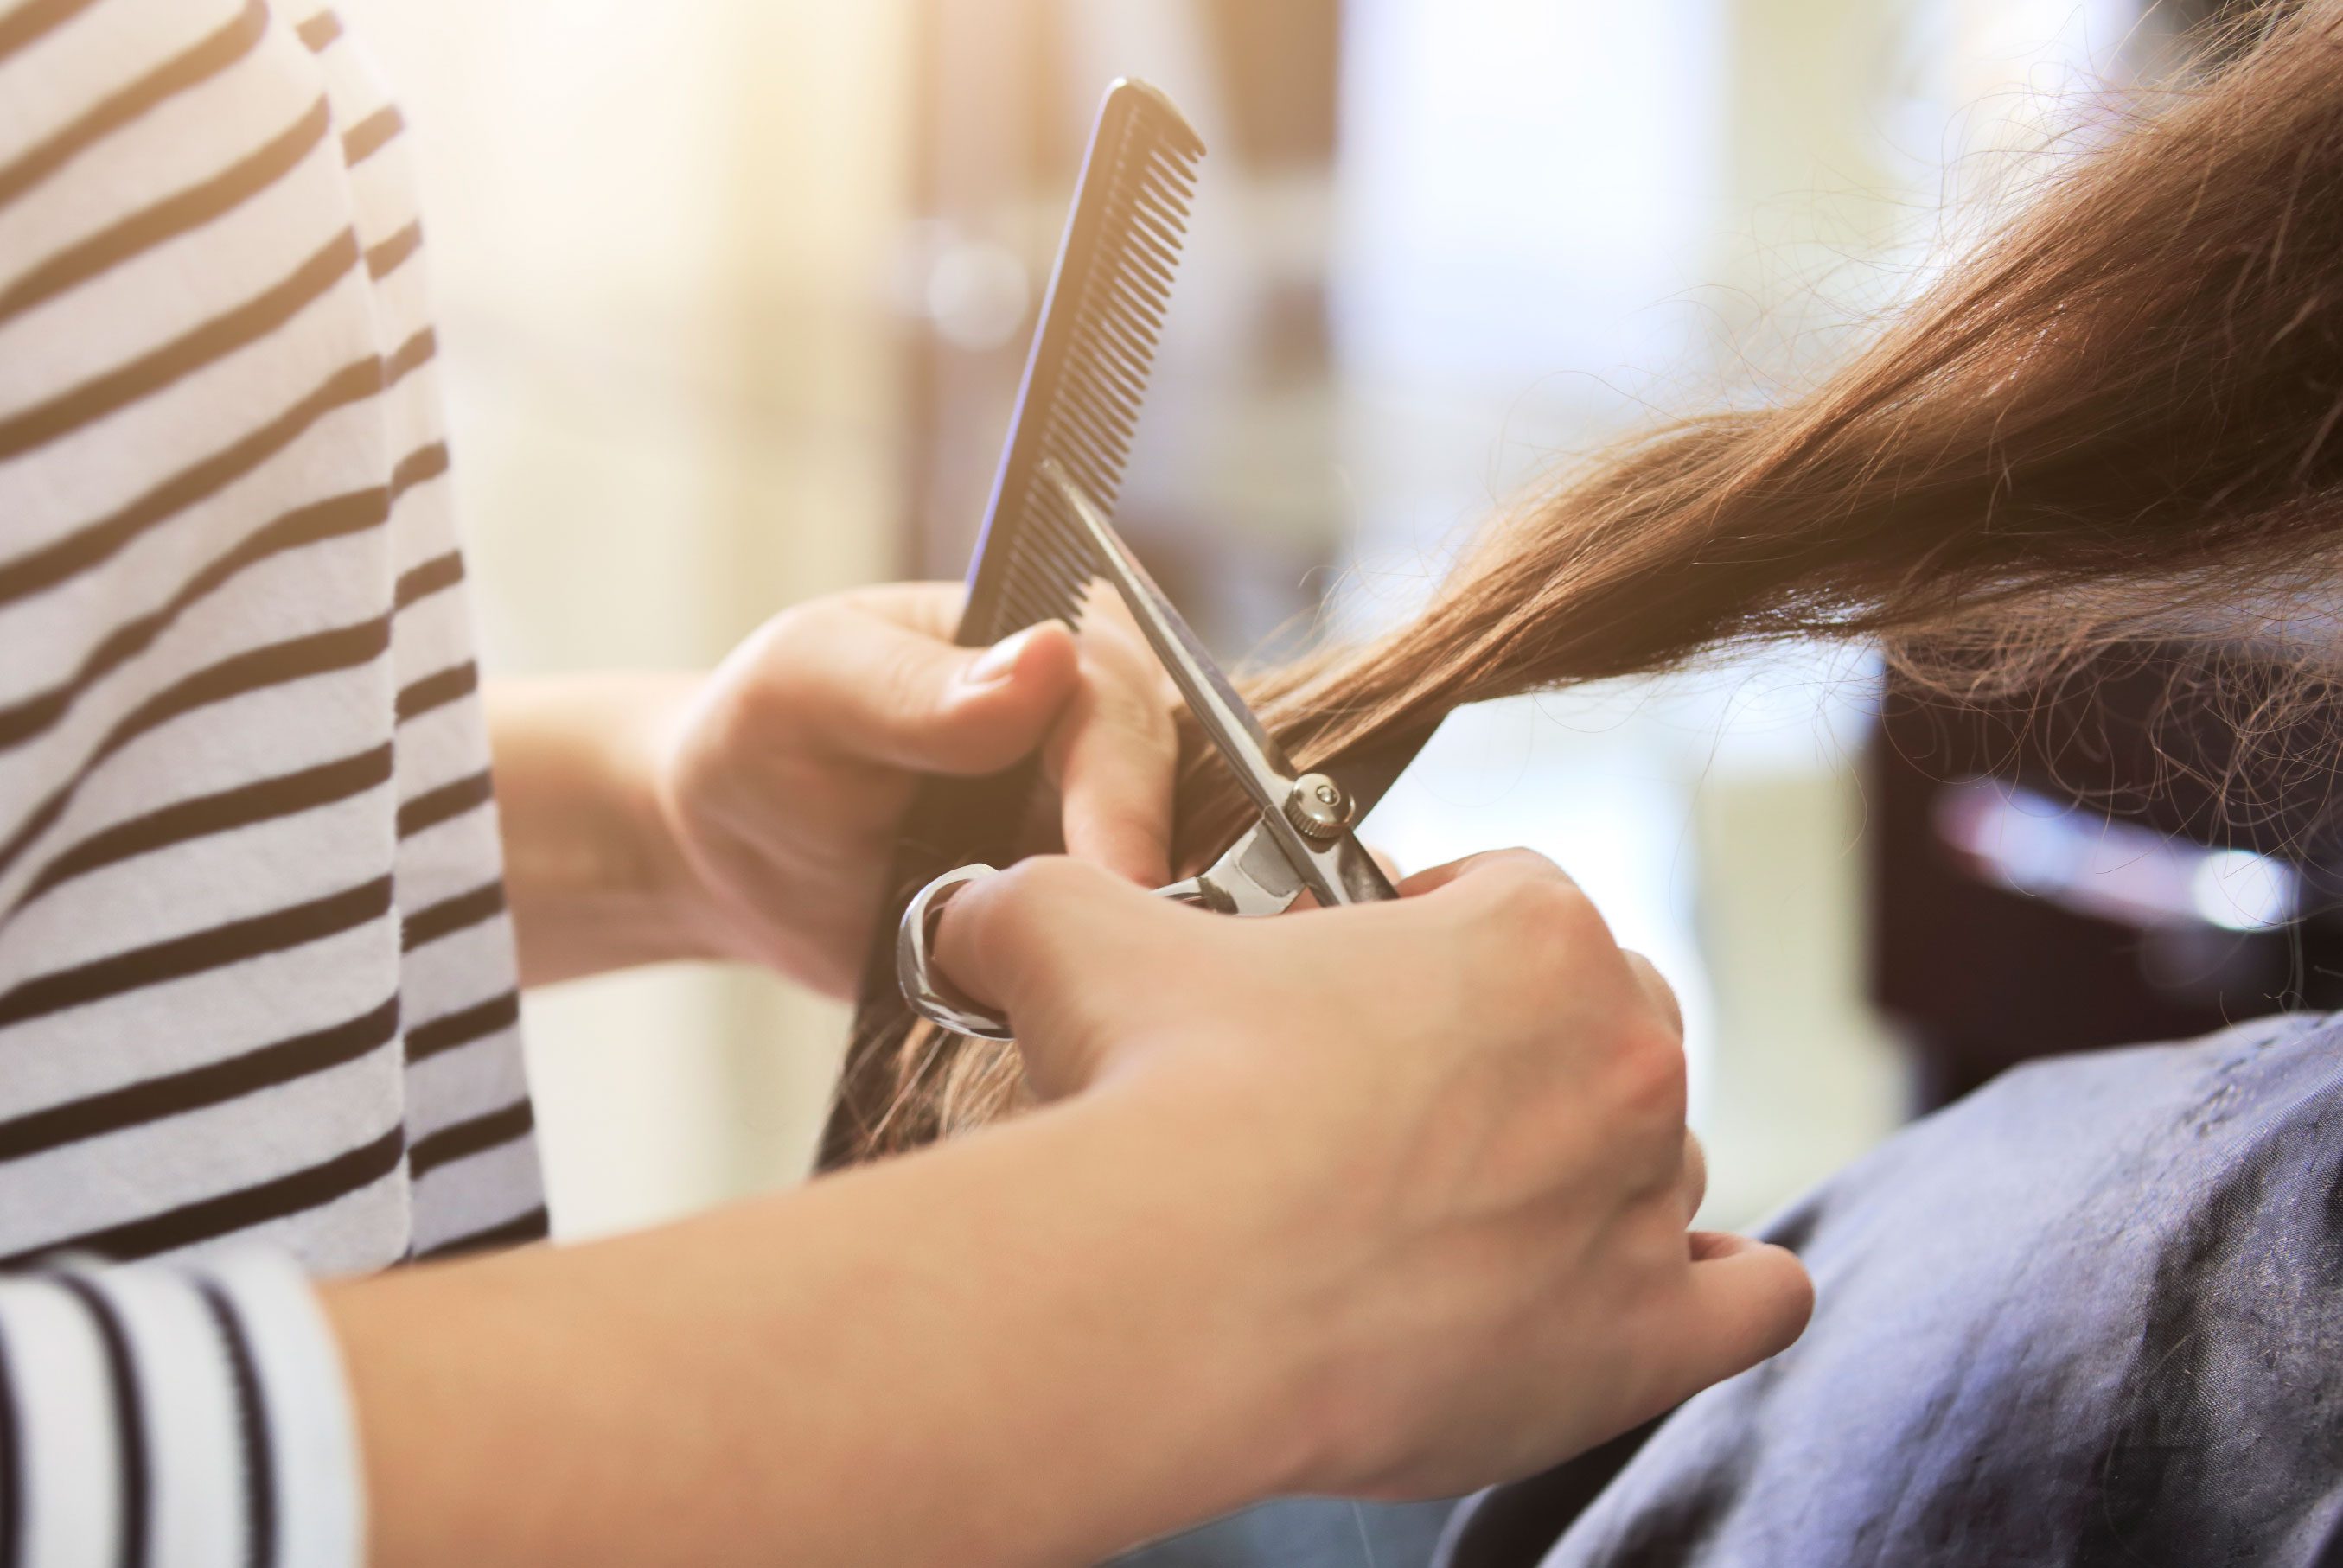 How do you find the closest hair salon?